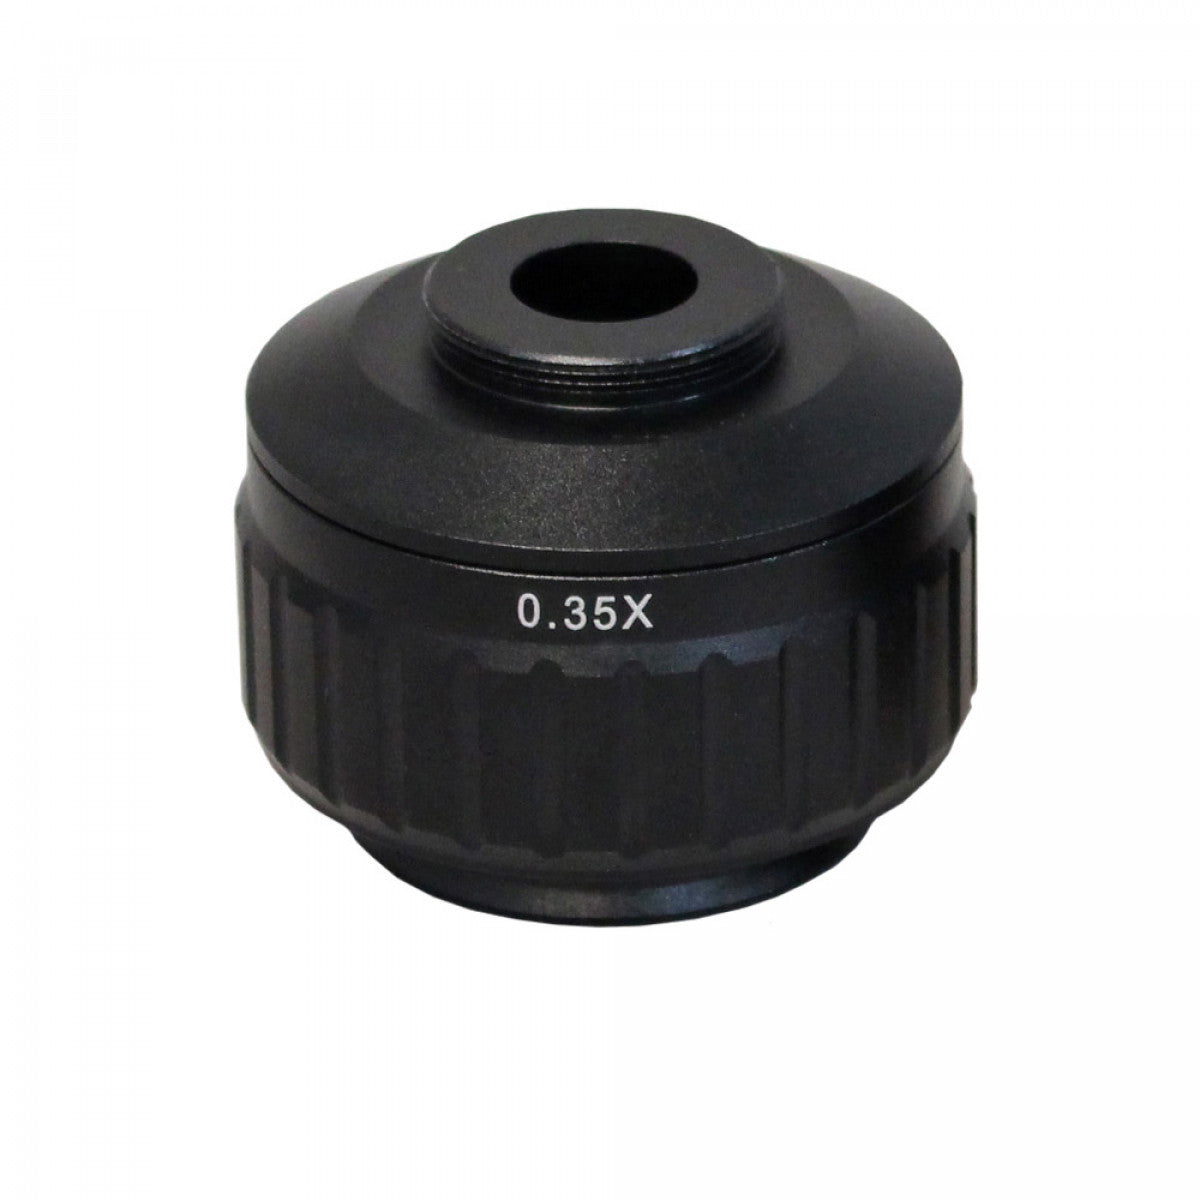 C-Mount Adapters For Accu-Scope EXI-310 Microscope